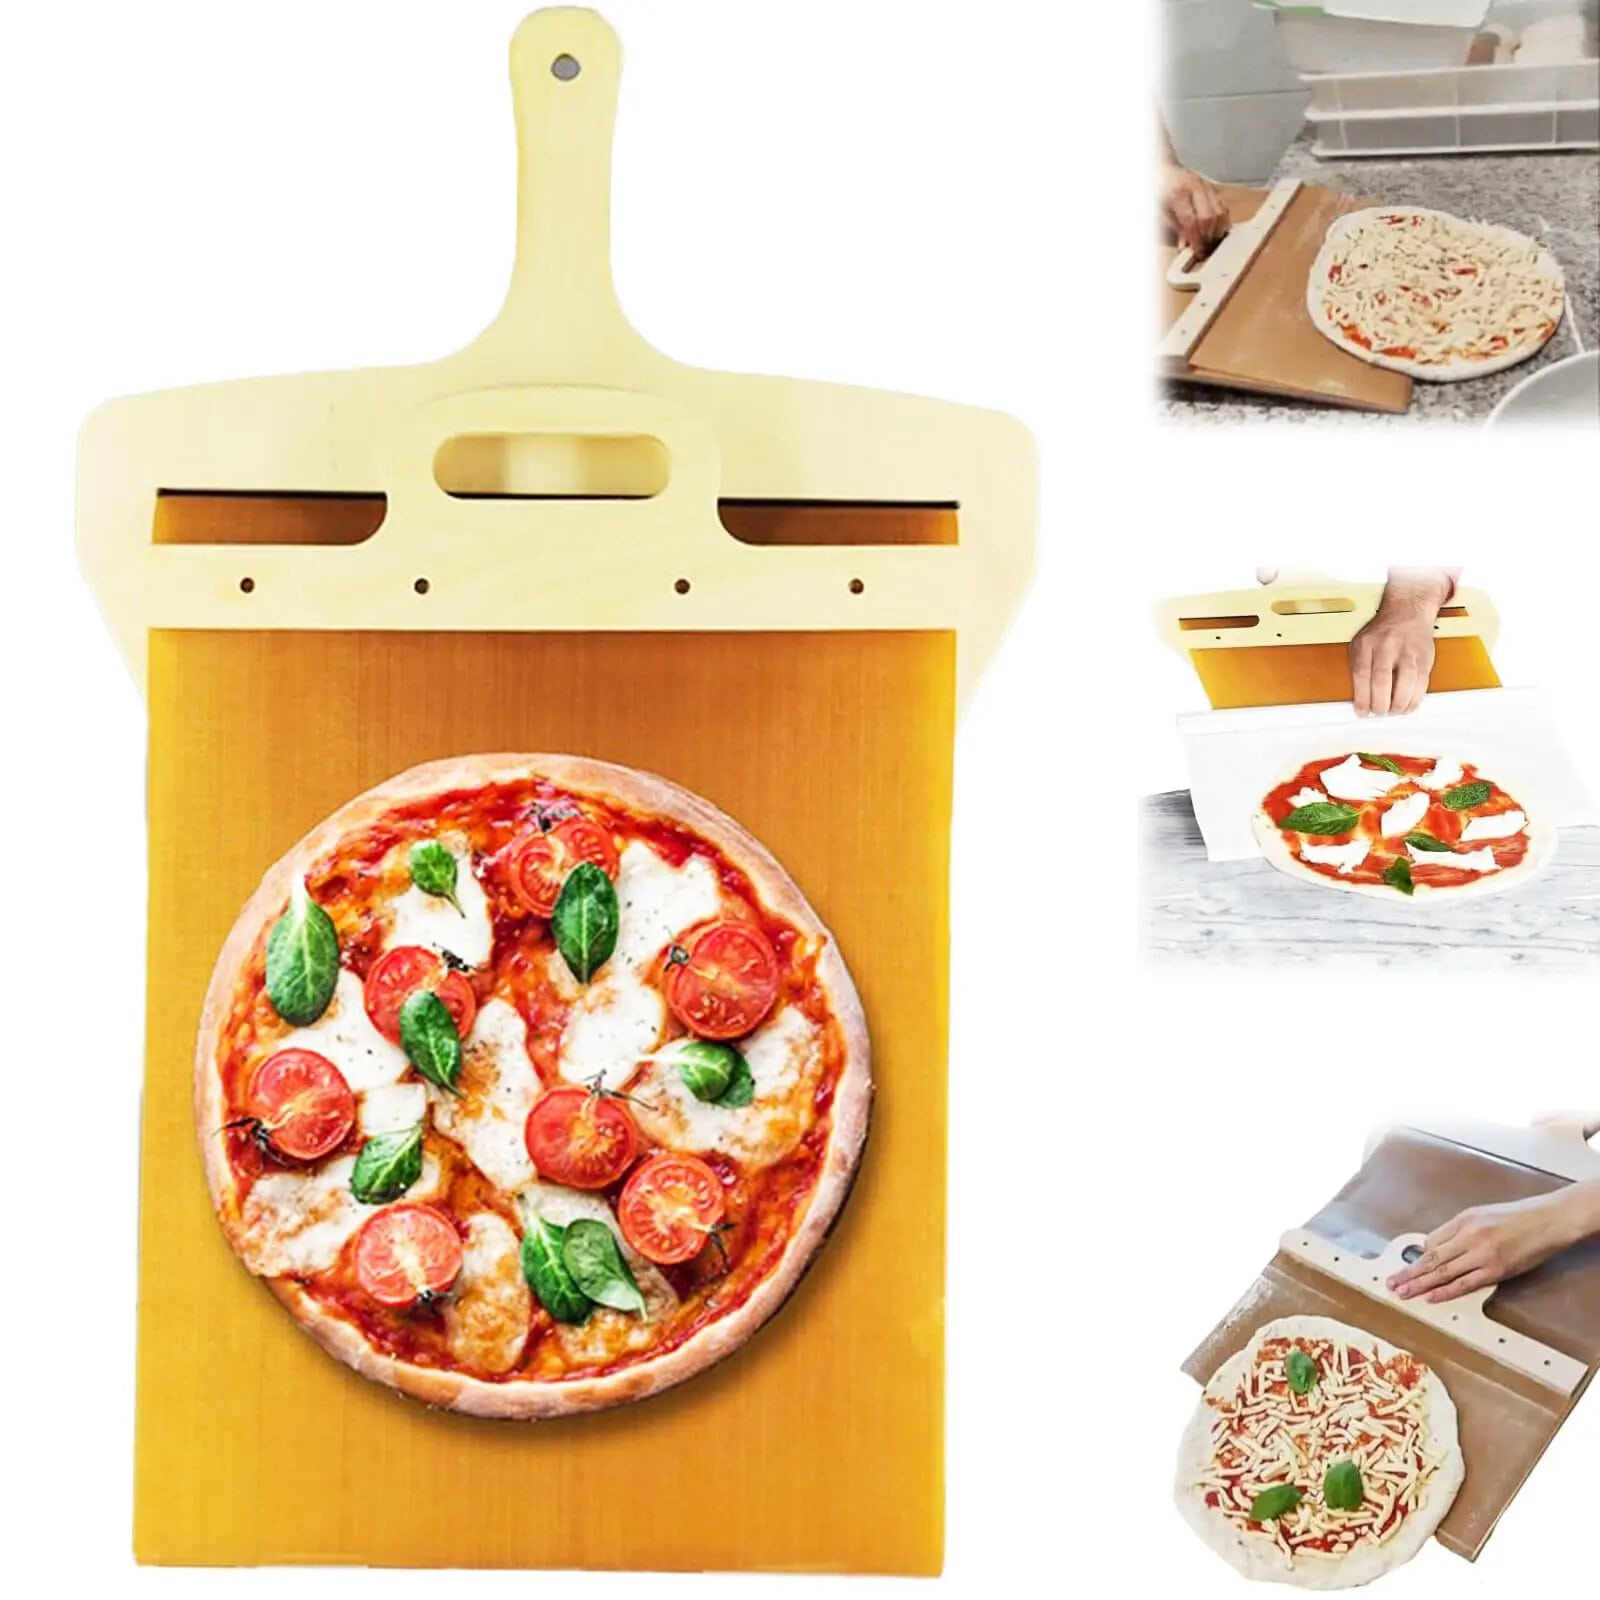 Wooden Pizza Shovel: Enhance Your Pizza Experience